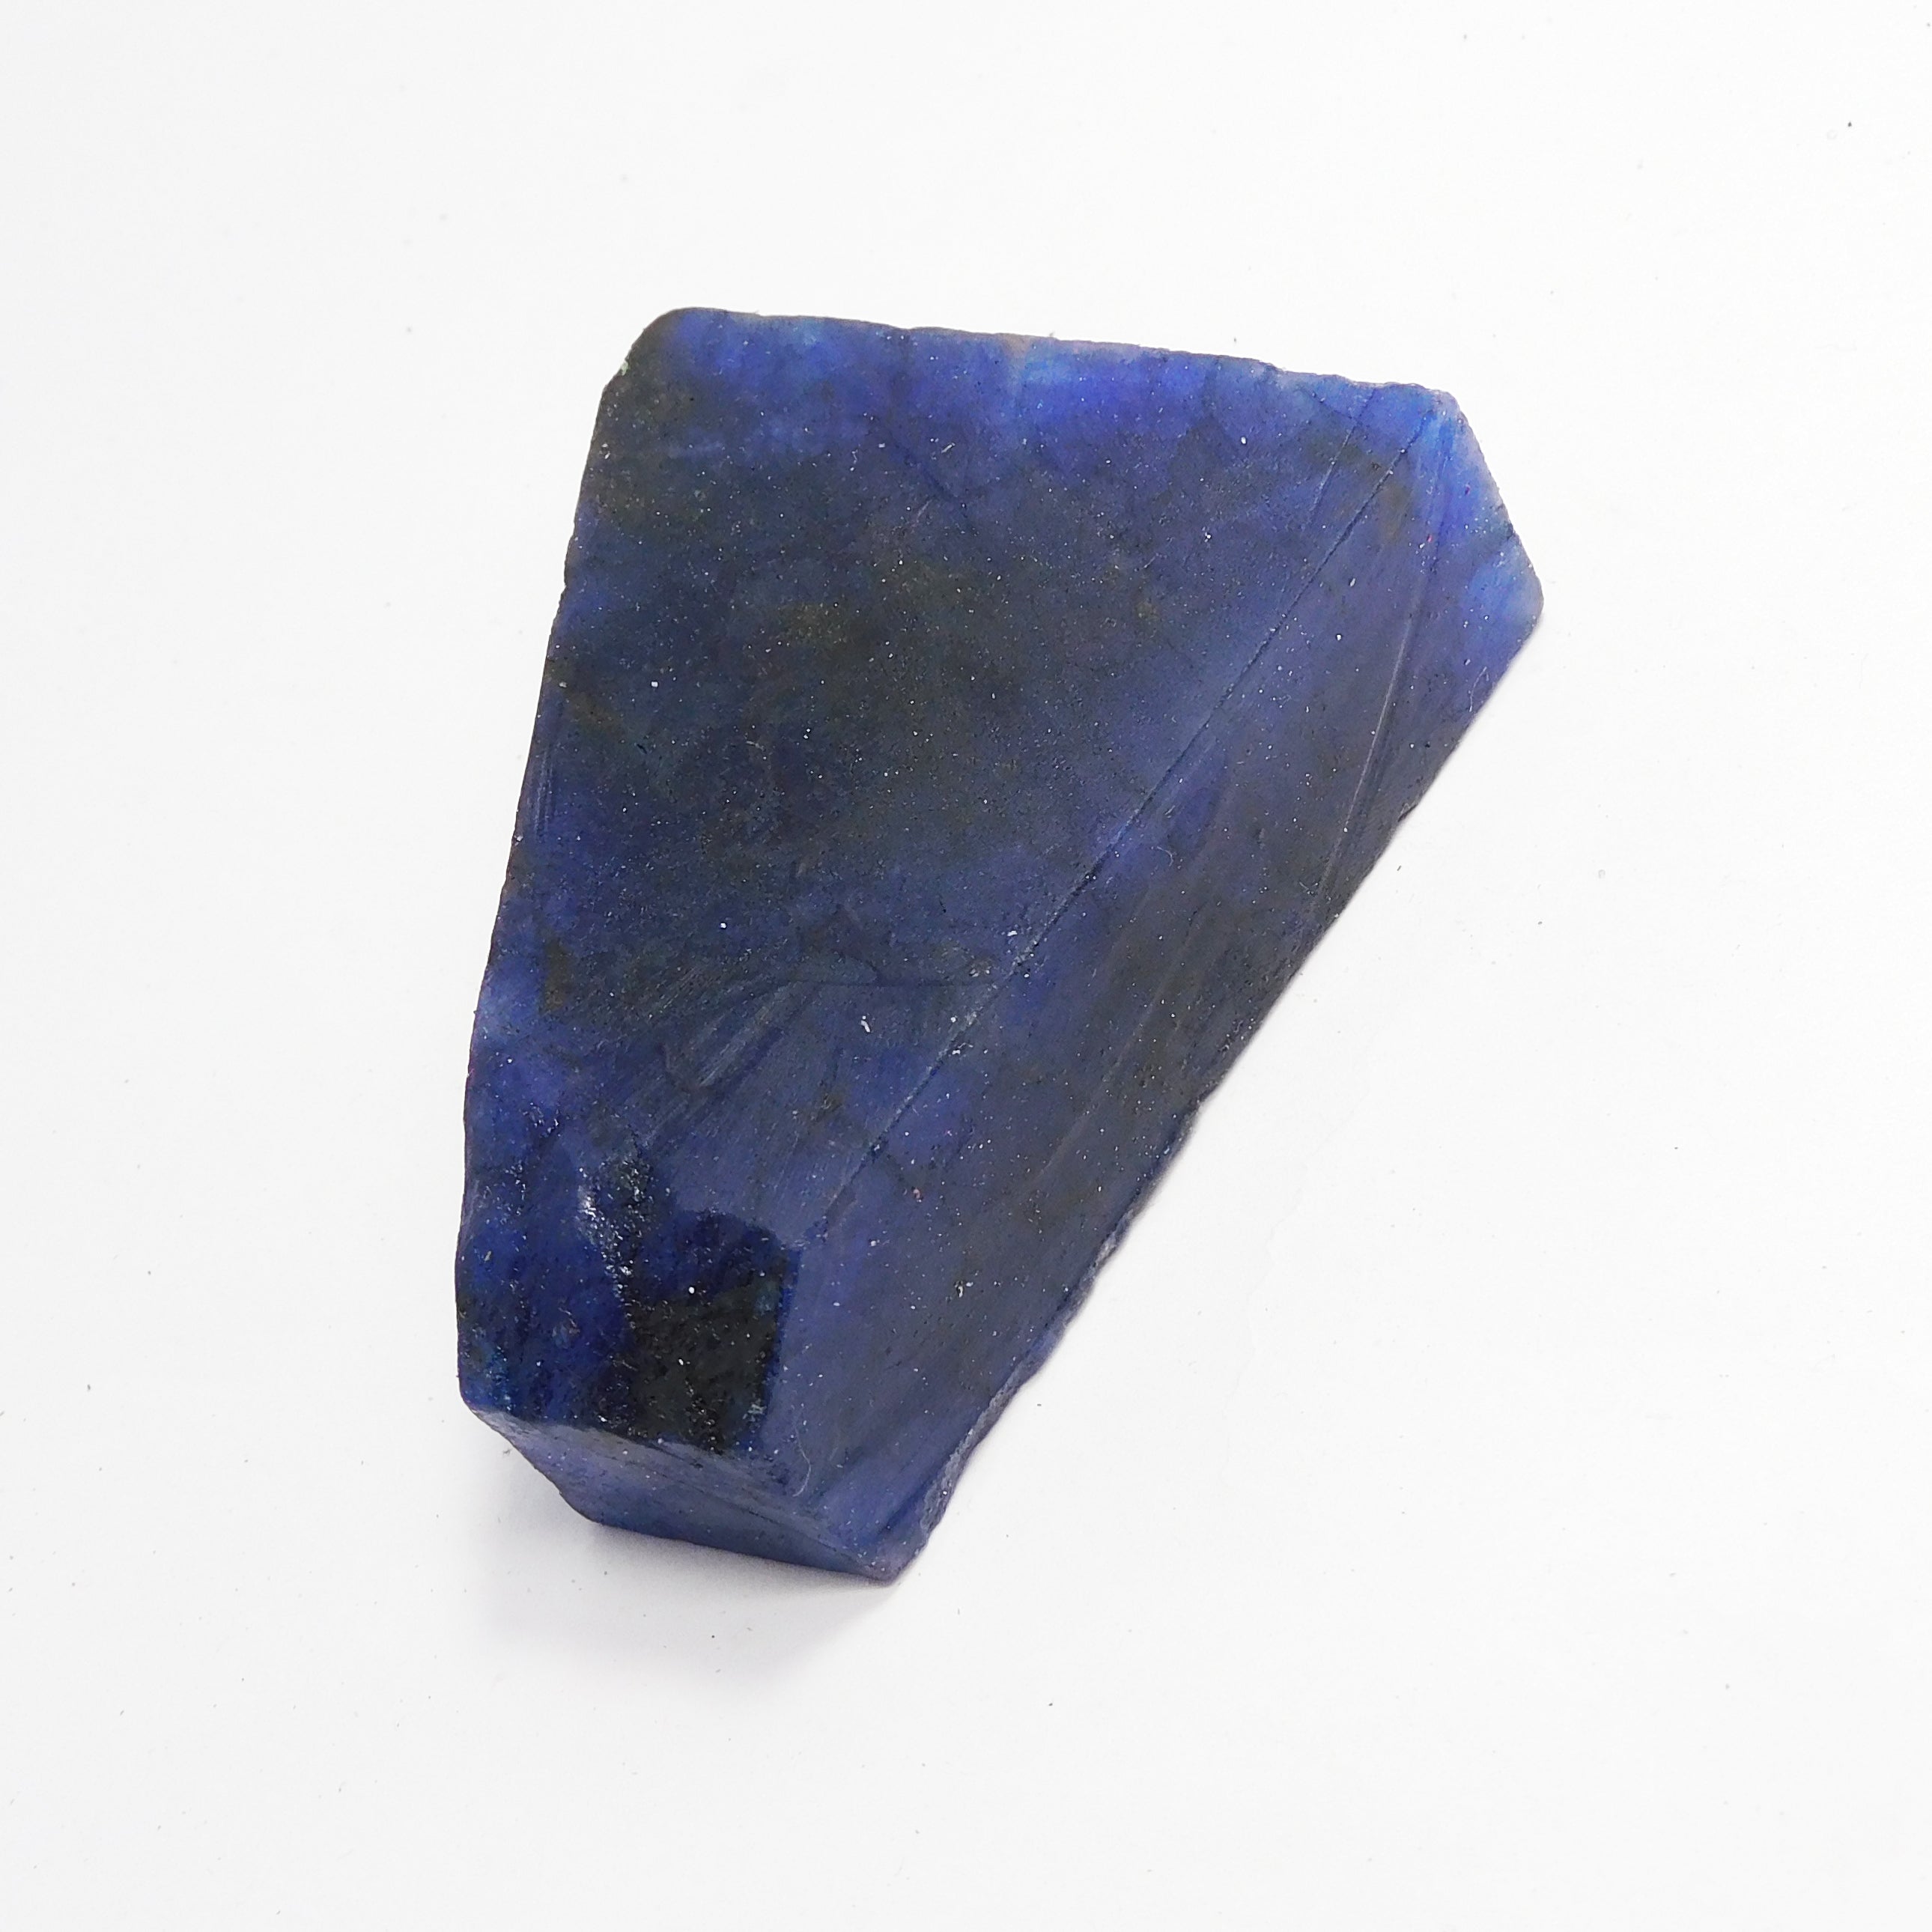 Sapphire Best Offer | Huge Size Rough | Uncut Raw Rough 523.15 Carat Natural Blue Sapphire Rough CERTIFIED Loose Gemstone | Free Shipping Free Gift | Gift For Her/ Him